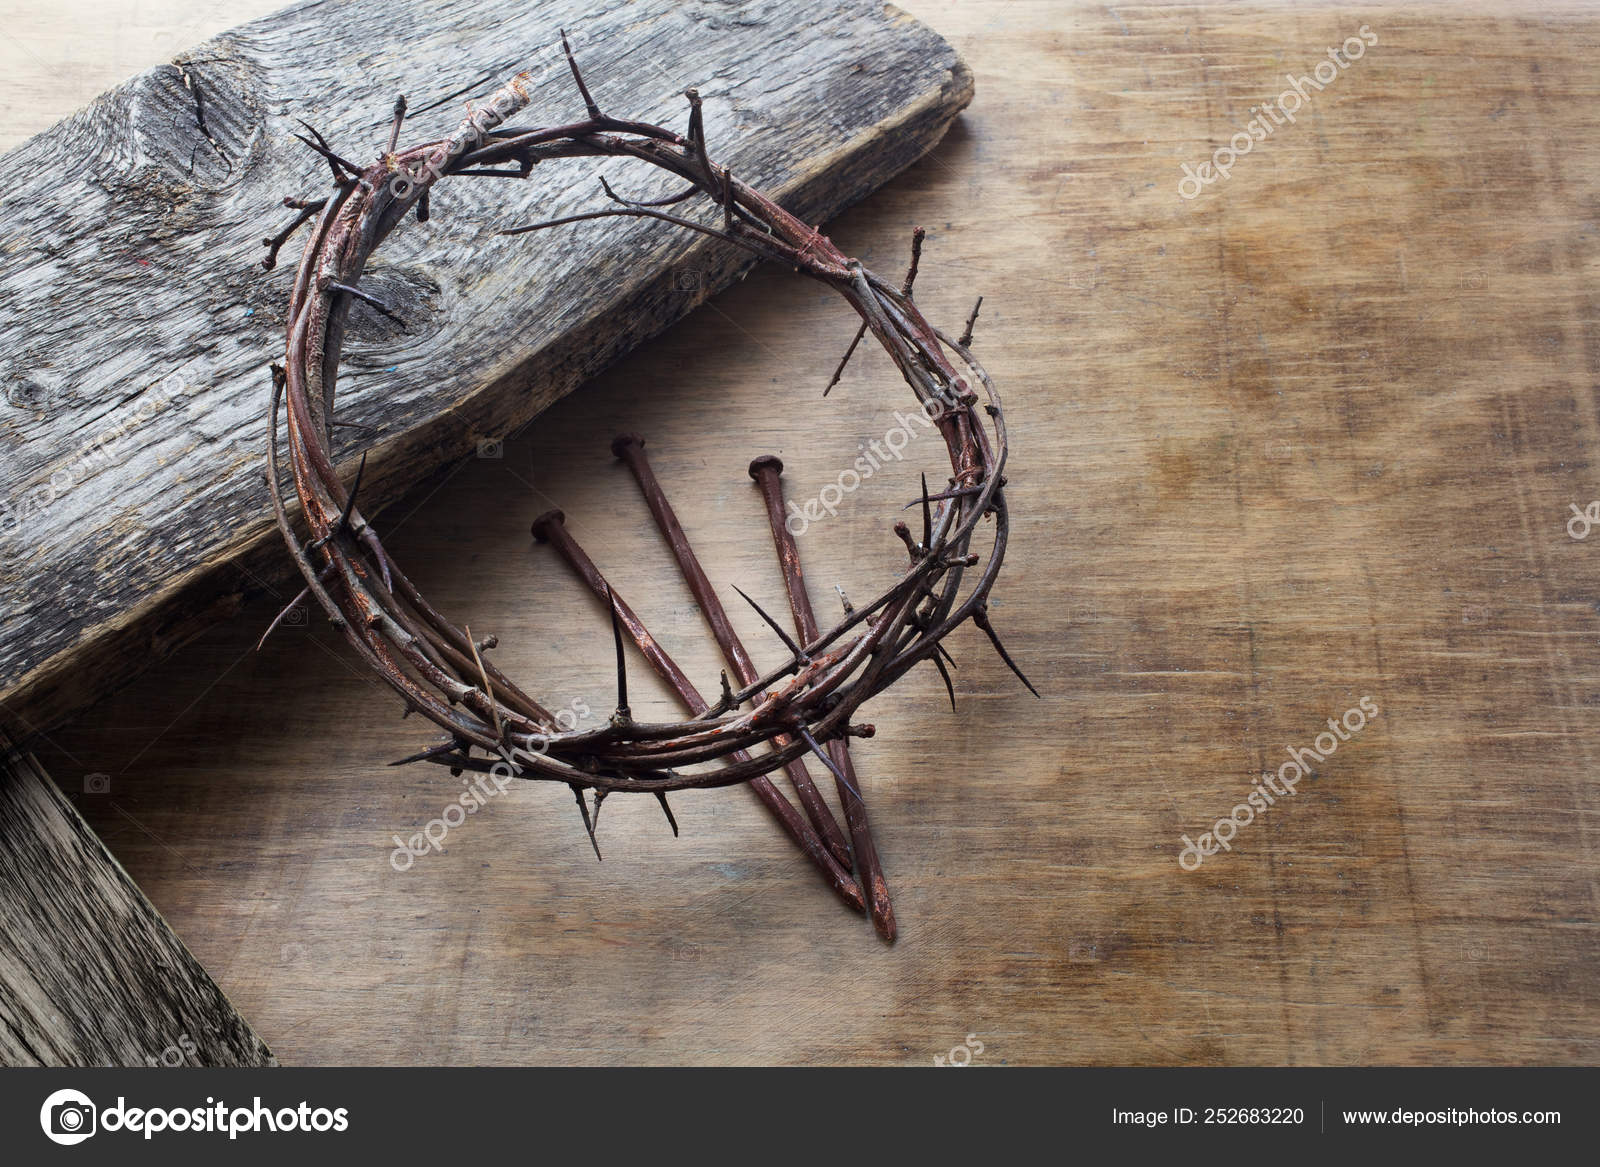 Crown Thorns Nails Wooden Mallet Over Stock Photo 352896224 | Shutterstock